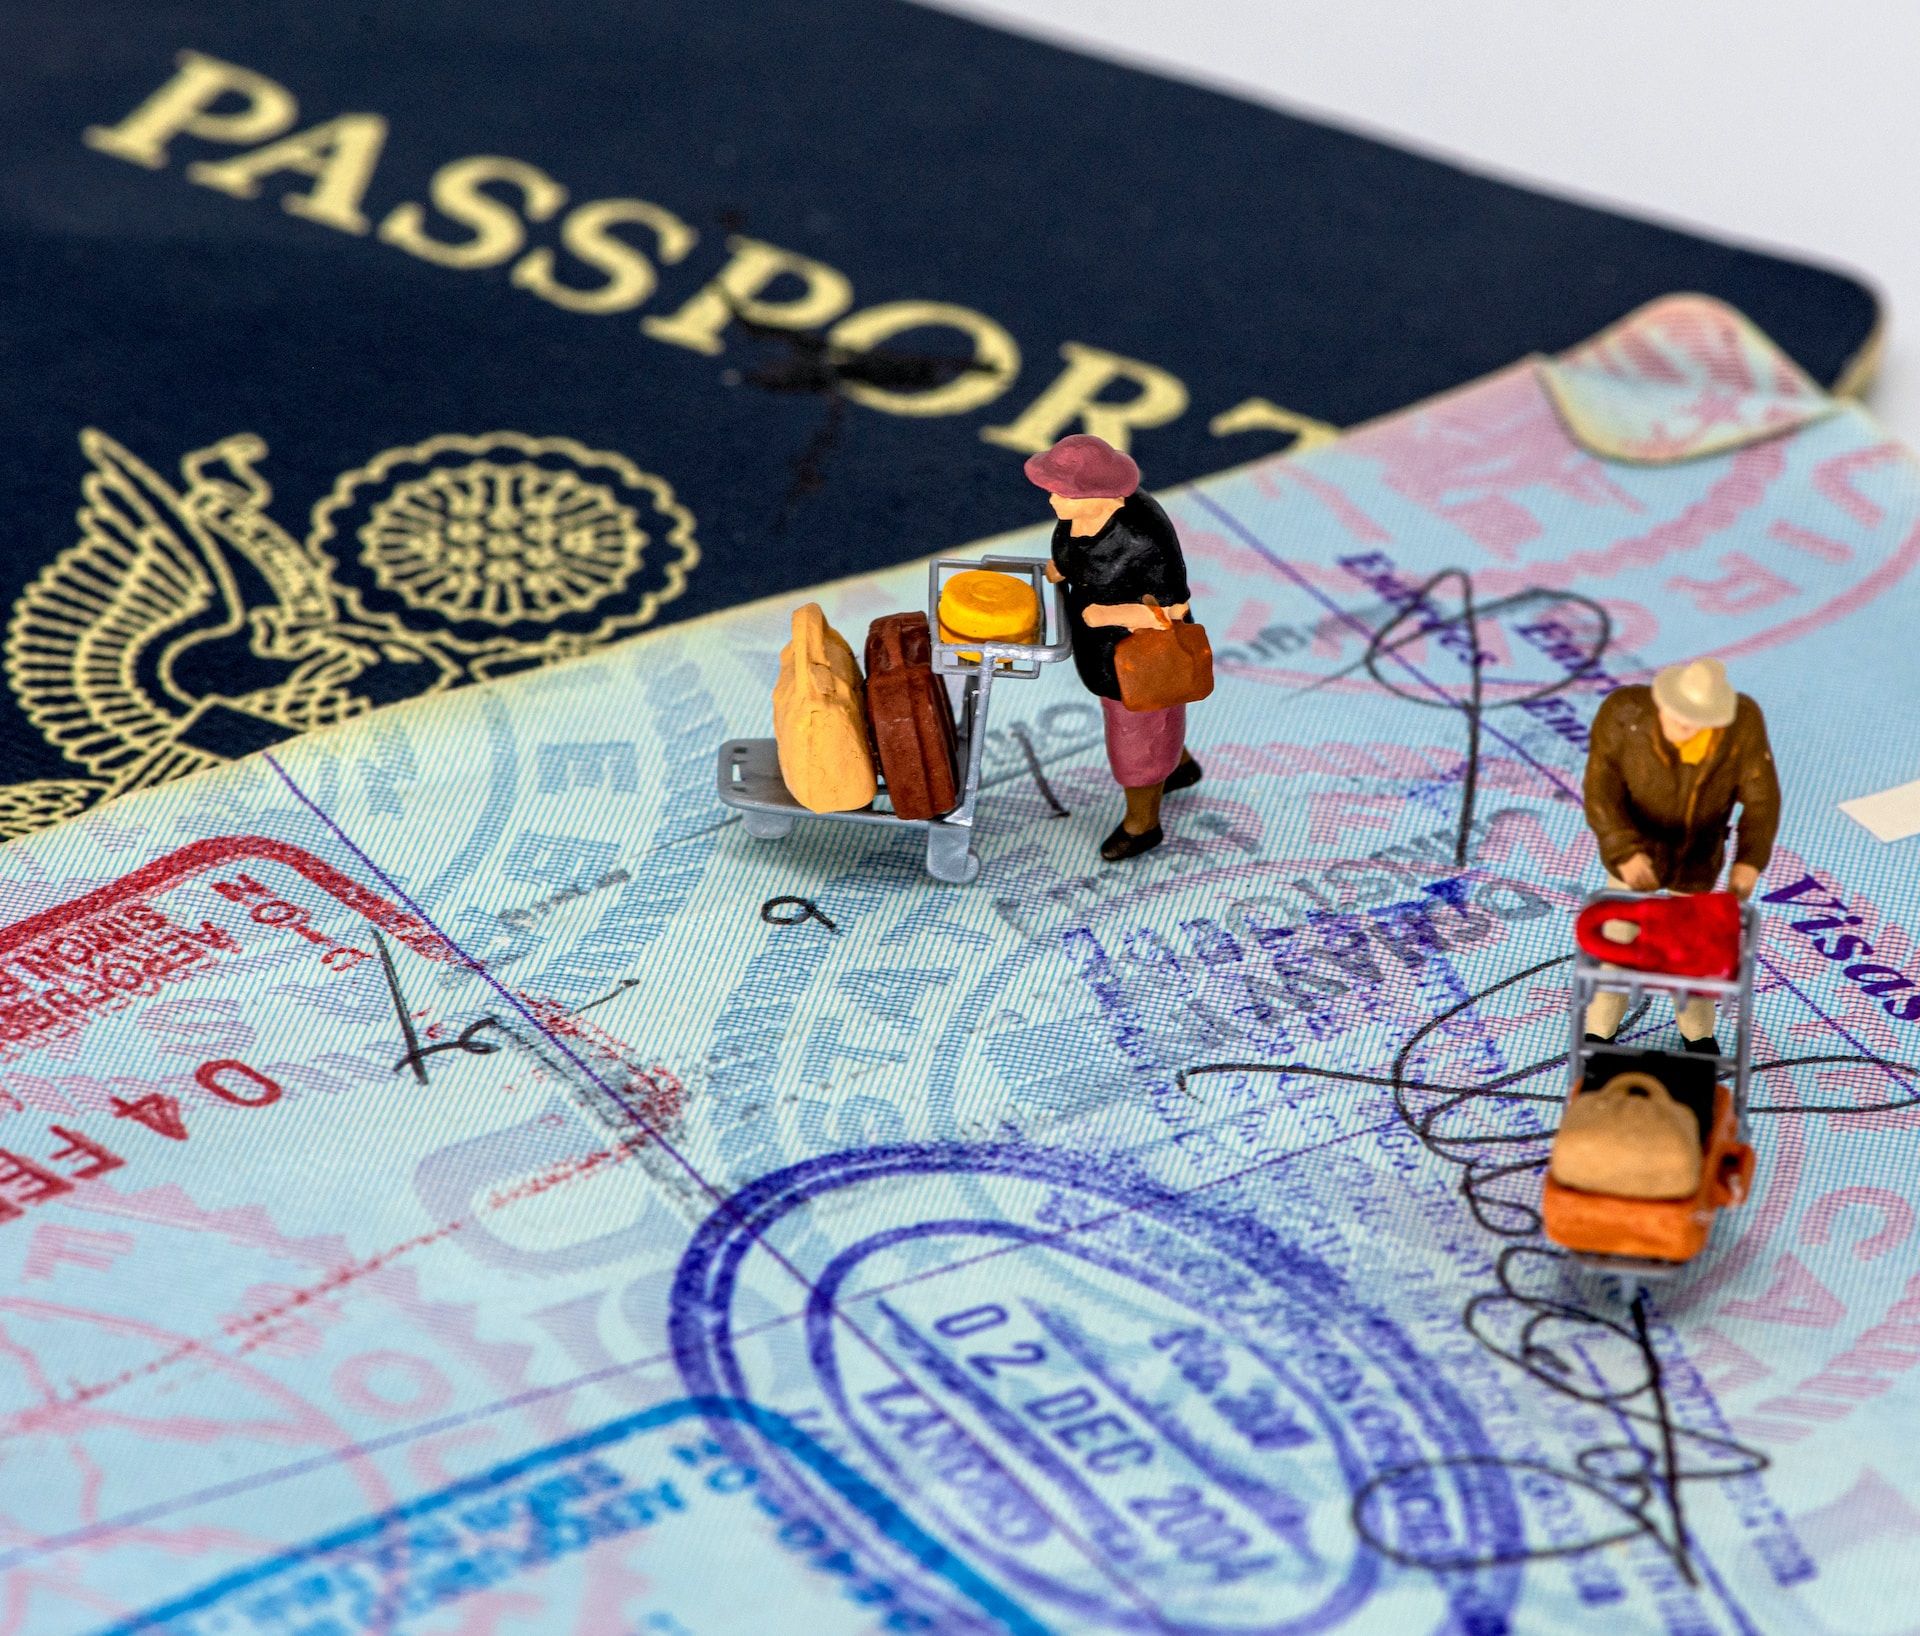 Image of two figurines walking on a passport page